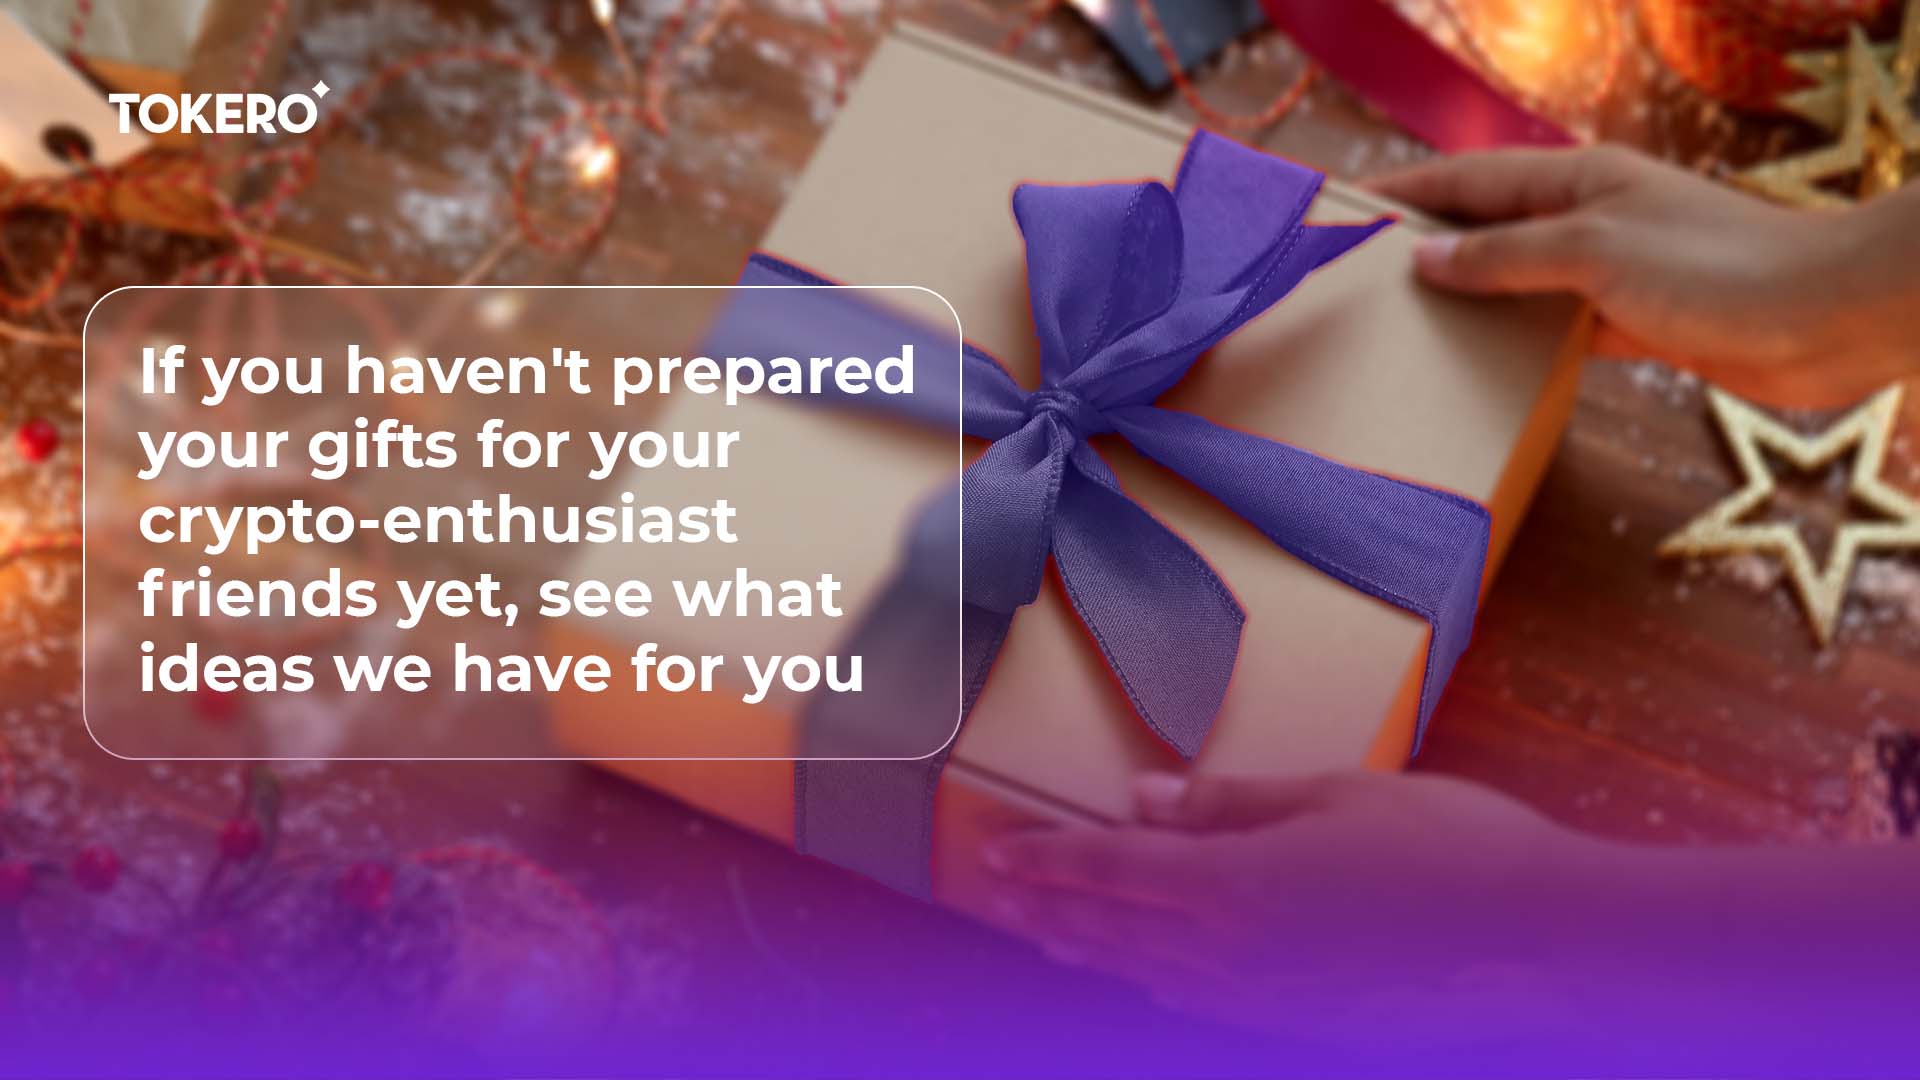 If you haven't prepared your gifts for your crypto-enthusiast friends yet, see what ideas we have for you